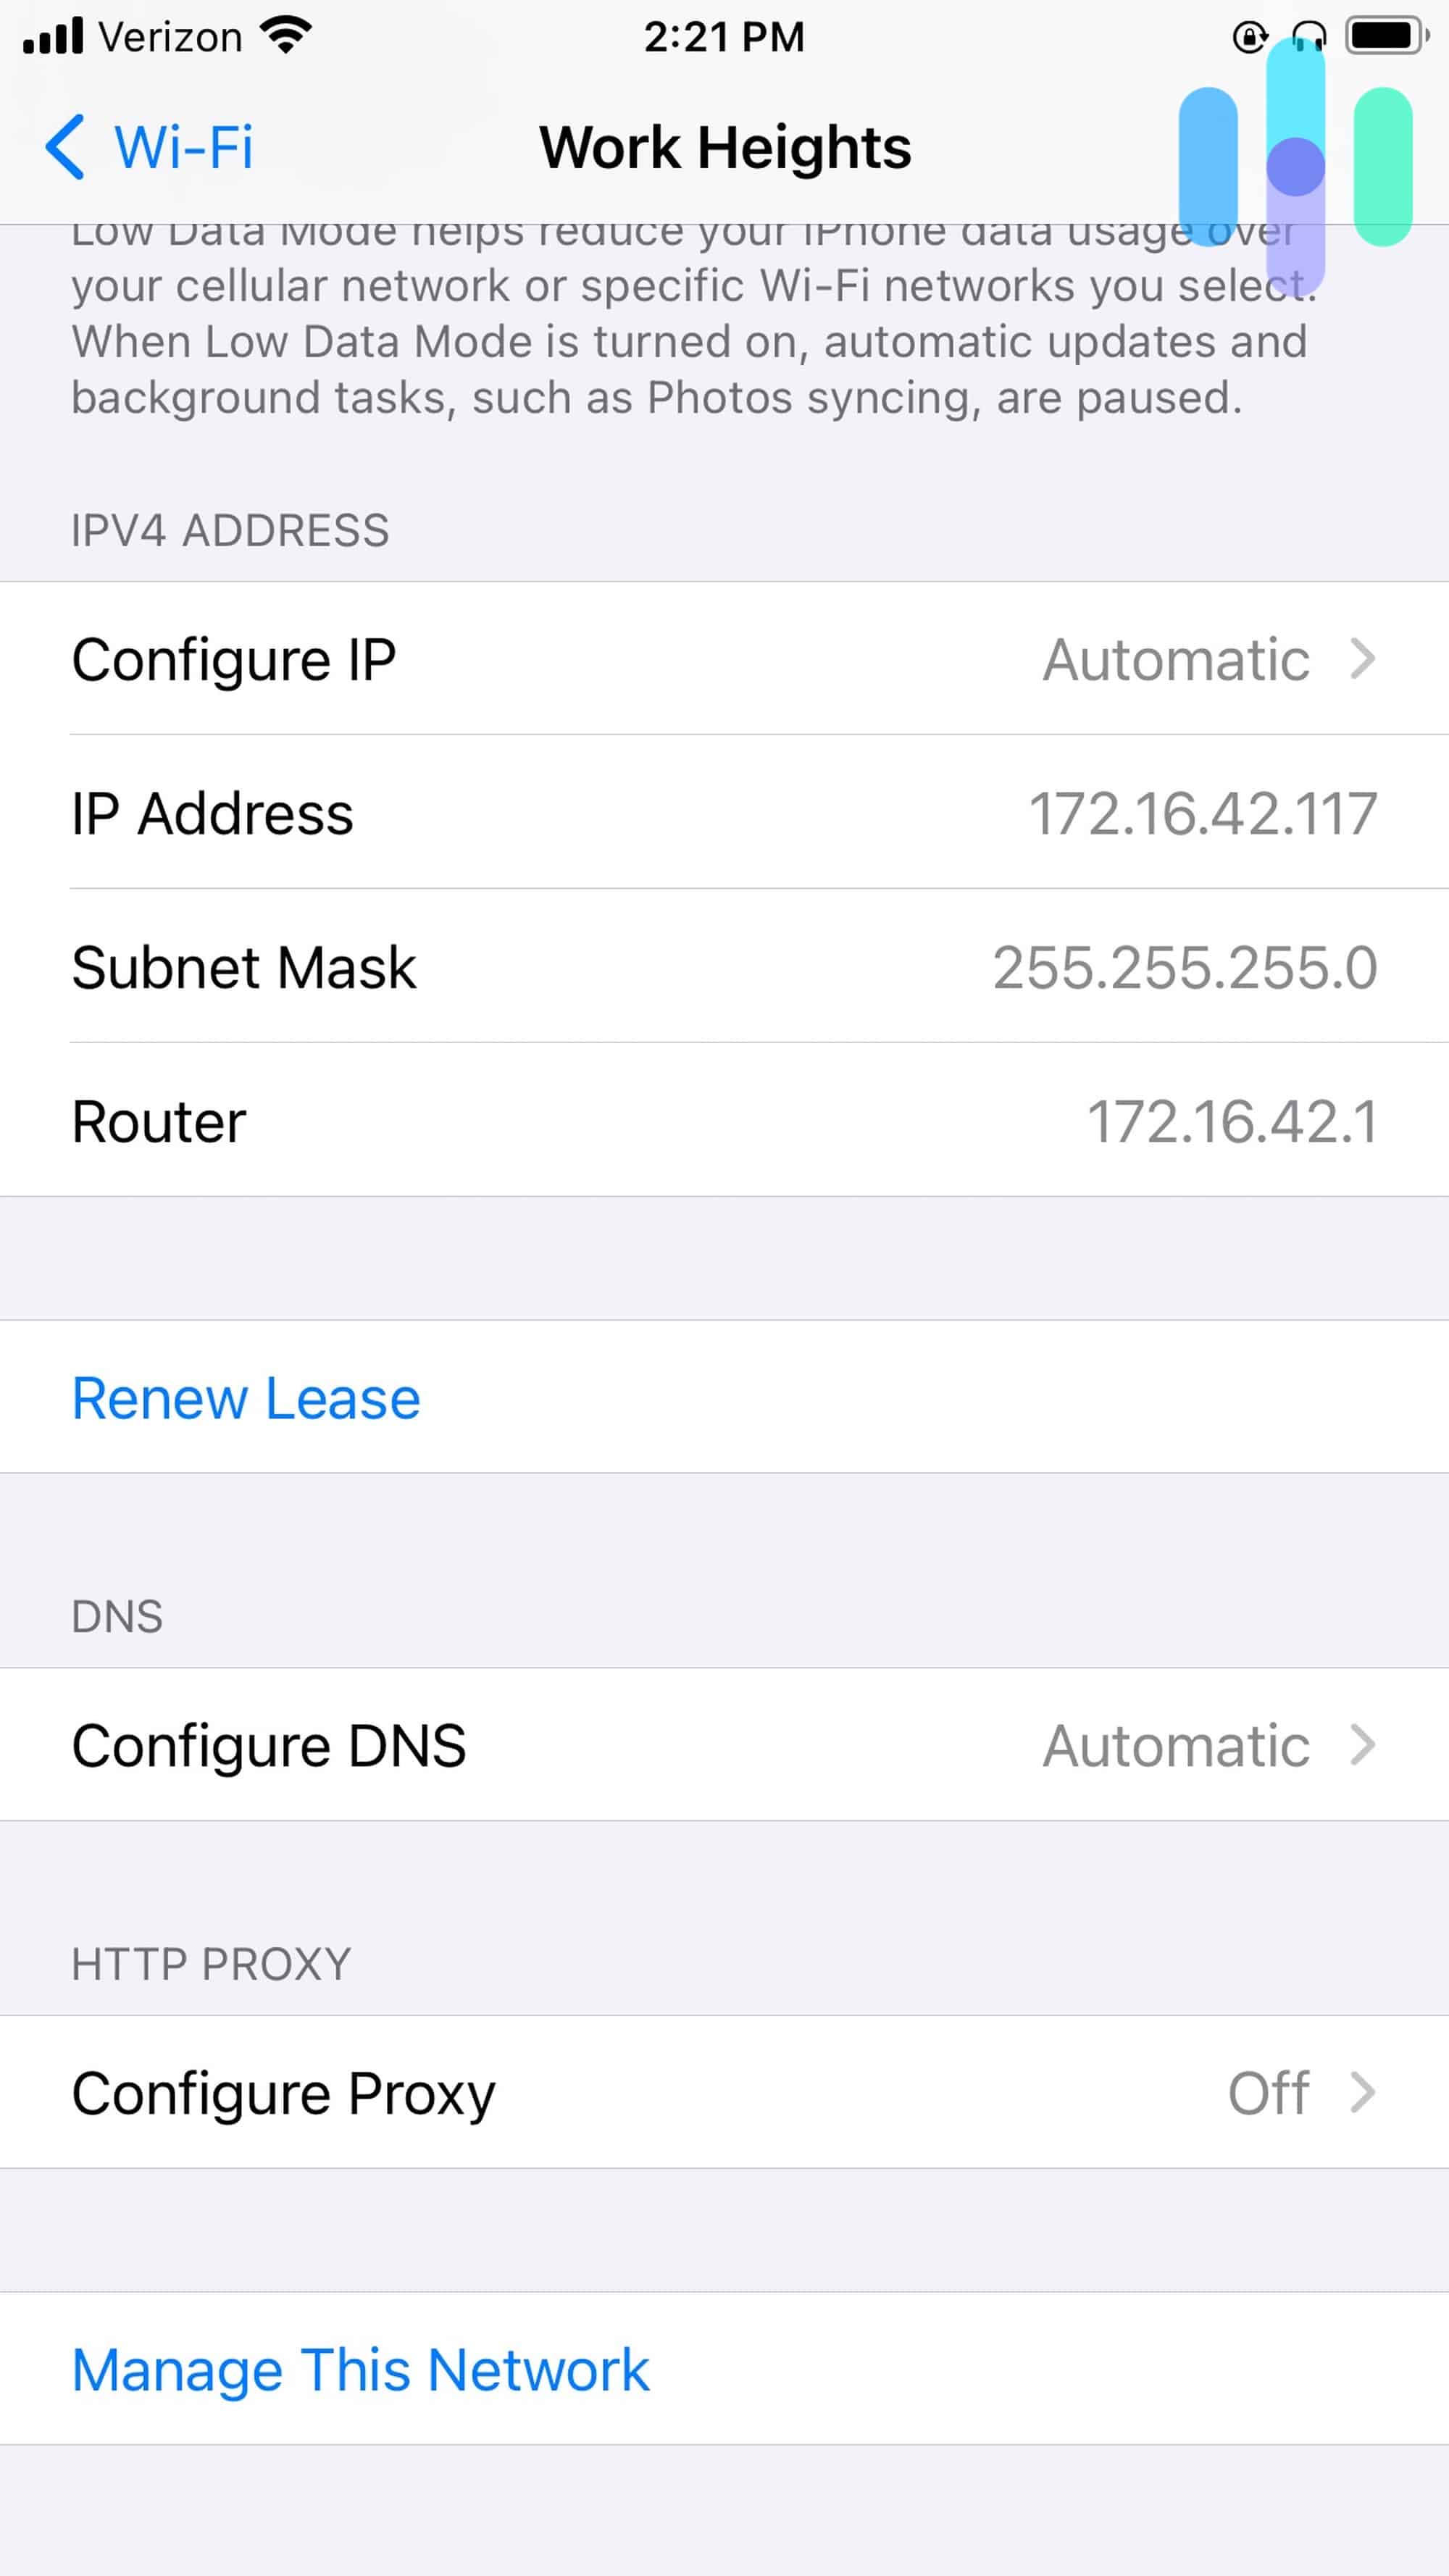 Changing Your IP - Proxy Settings on iPhone